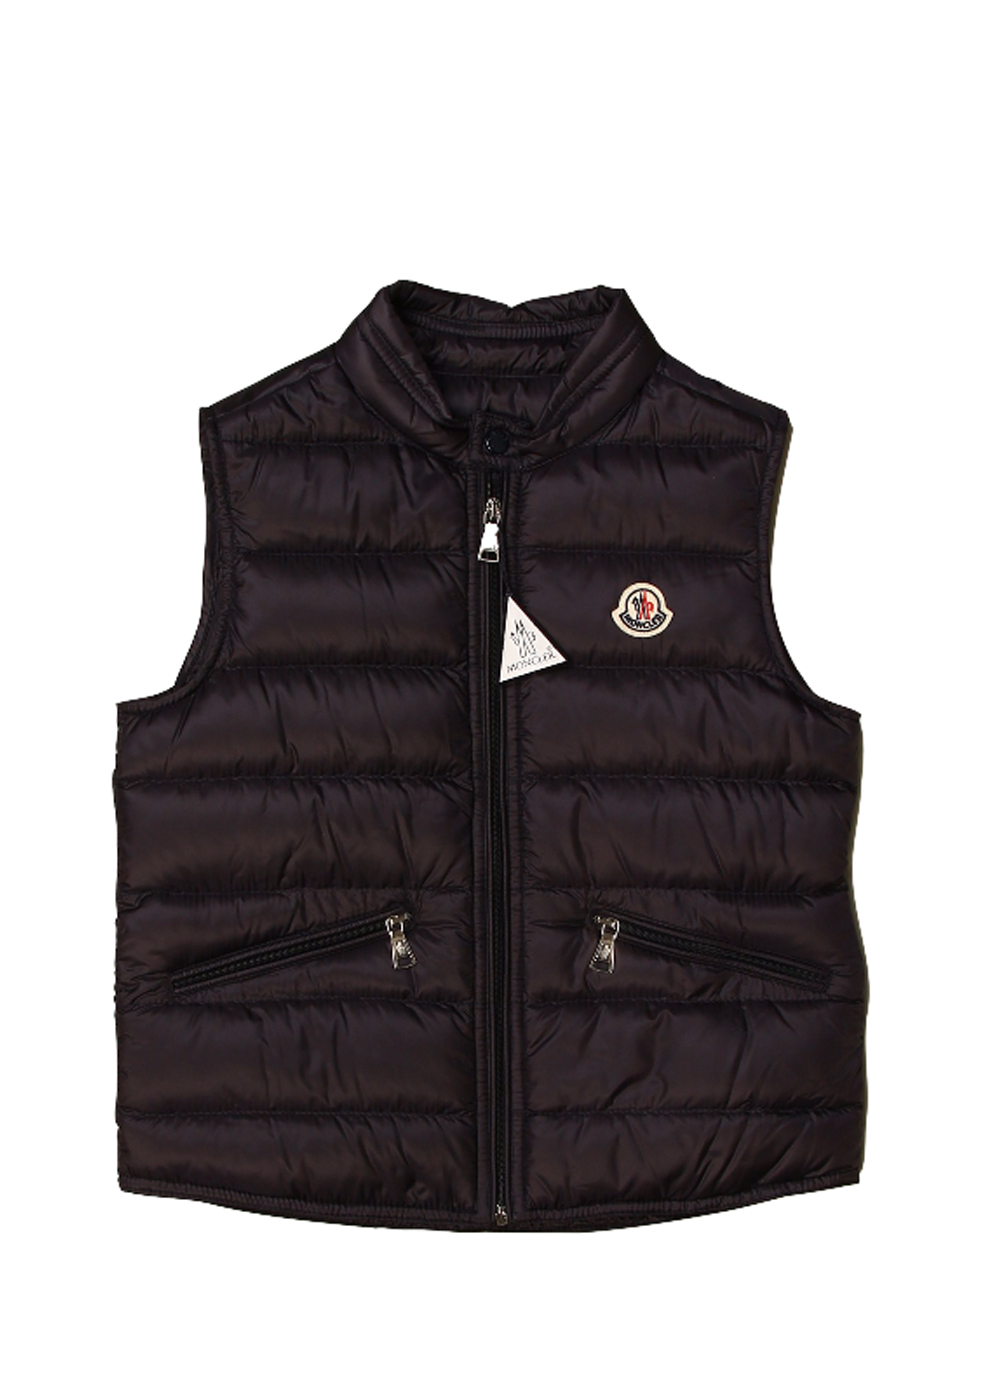 Featured image for “Moncler Gilet Gui”